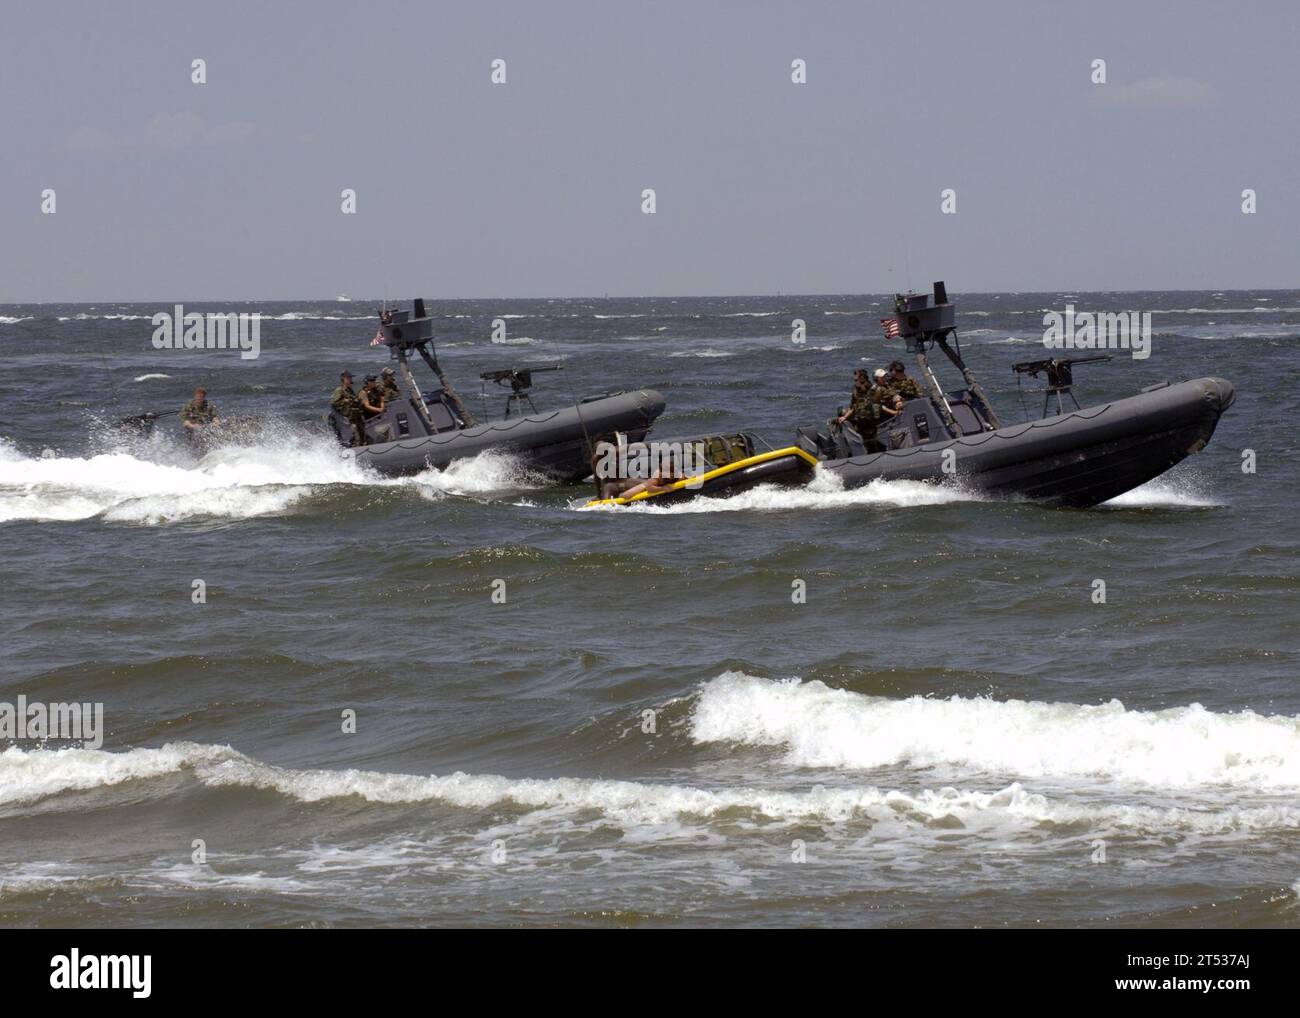 0907188949D-155 NORFOLK, Va. (July 18, 2009) Navy SEALs are extracted from the waters of the Chesapeake Bay into a sling boat being pulled by a rigid hull inflatable boat (RHIB) during a capabilities demonstration at Naval Amphibious Base Little Creek. The Naval Special Warfare community displayed its capabilities as part of the 40th UDT-SEAL East Coast Reunion celebration. Events are planned throughout the weekend to honor UDT/SEAL history, heritage, and families. (Official U.S. Navy Stock Photo